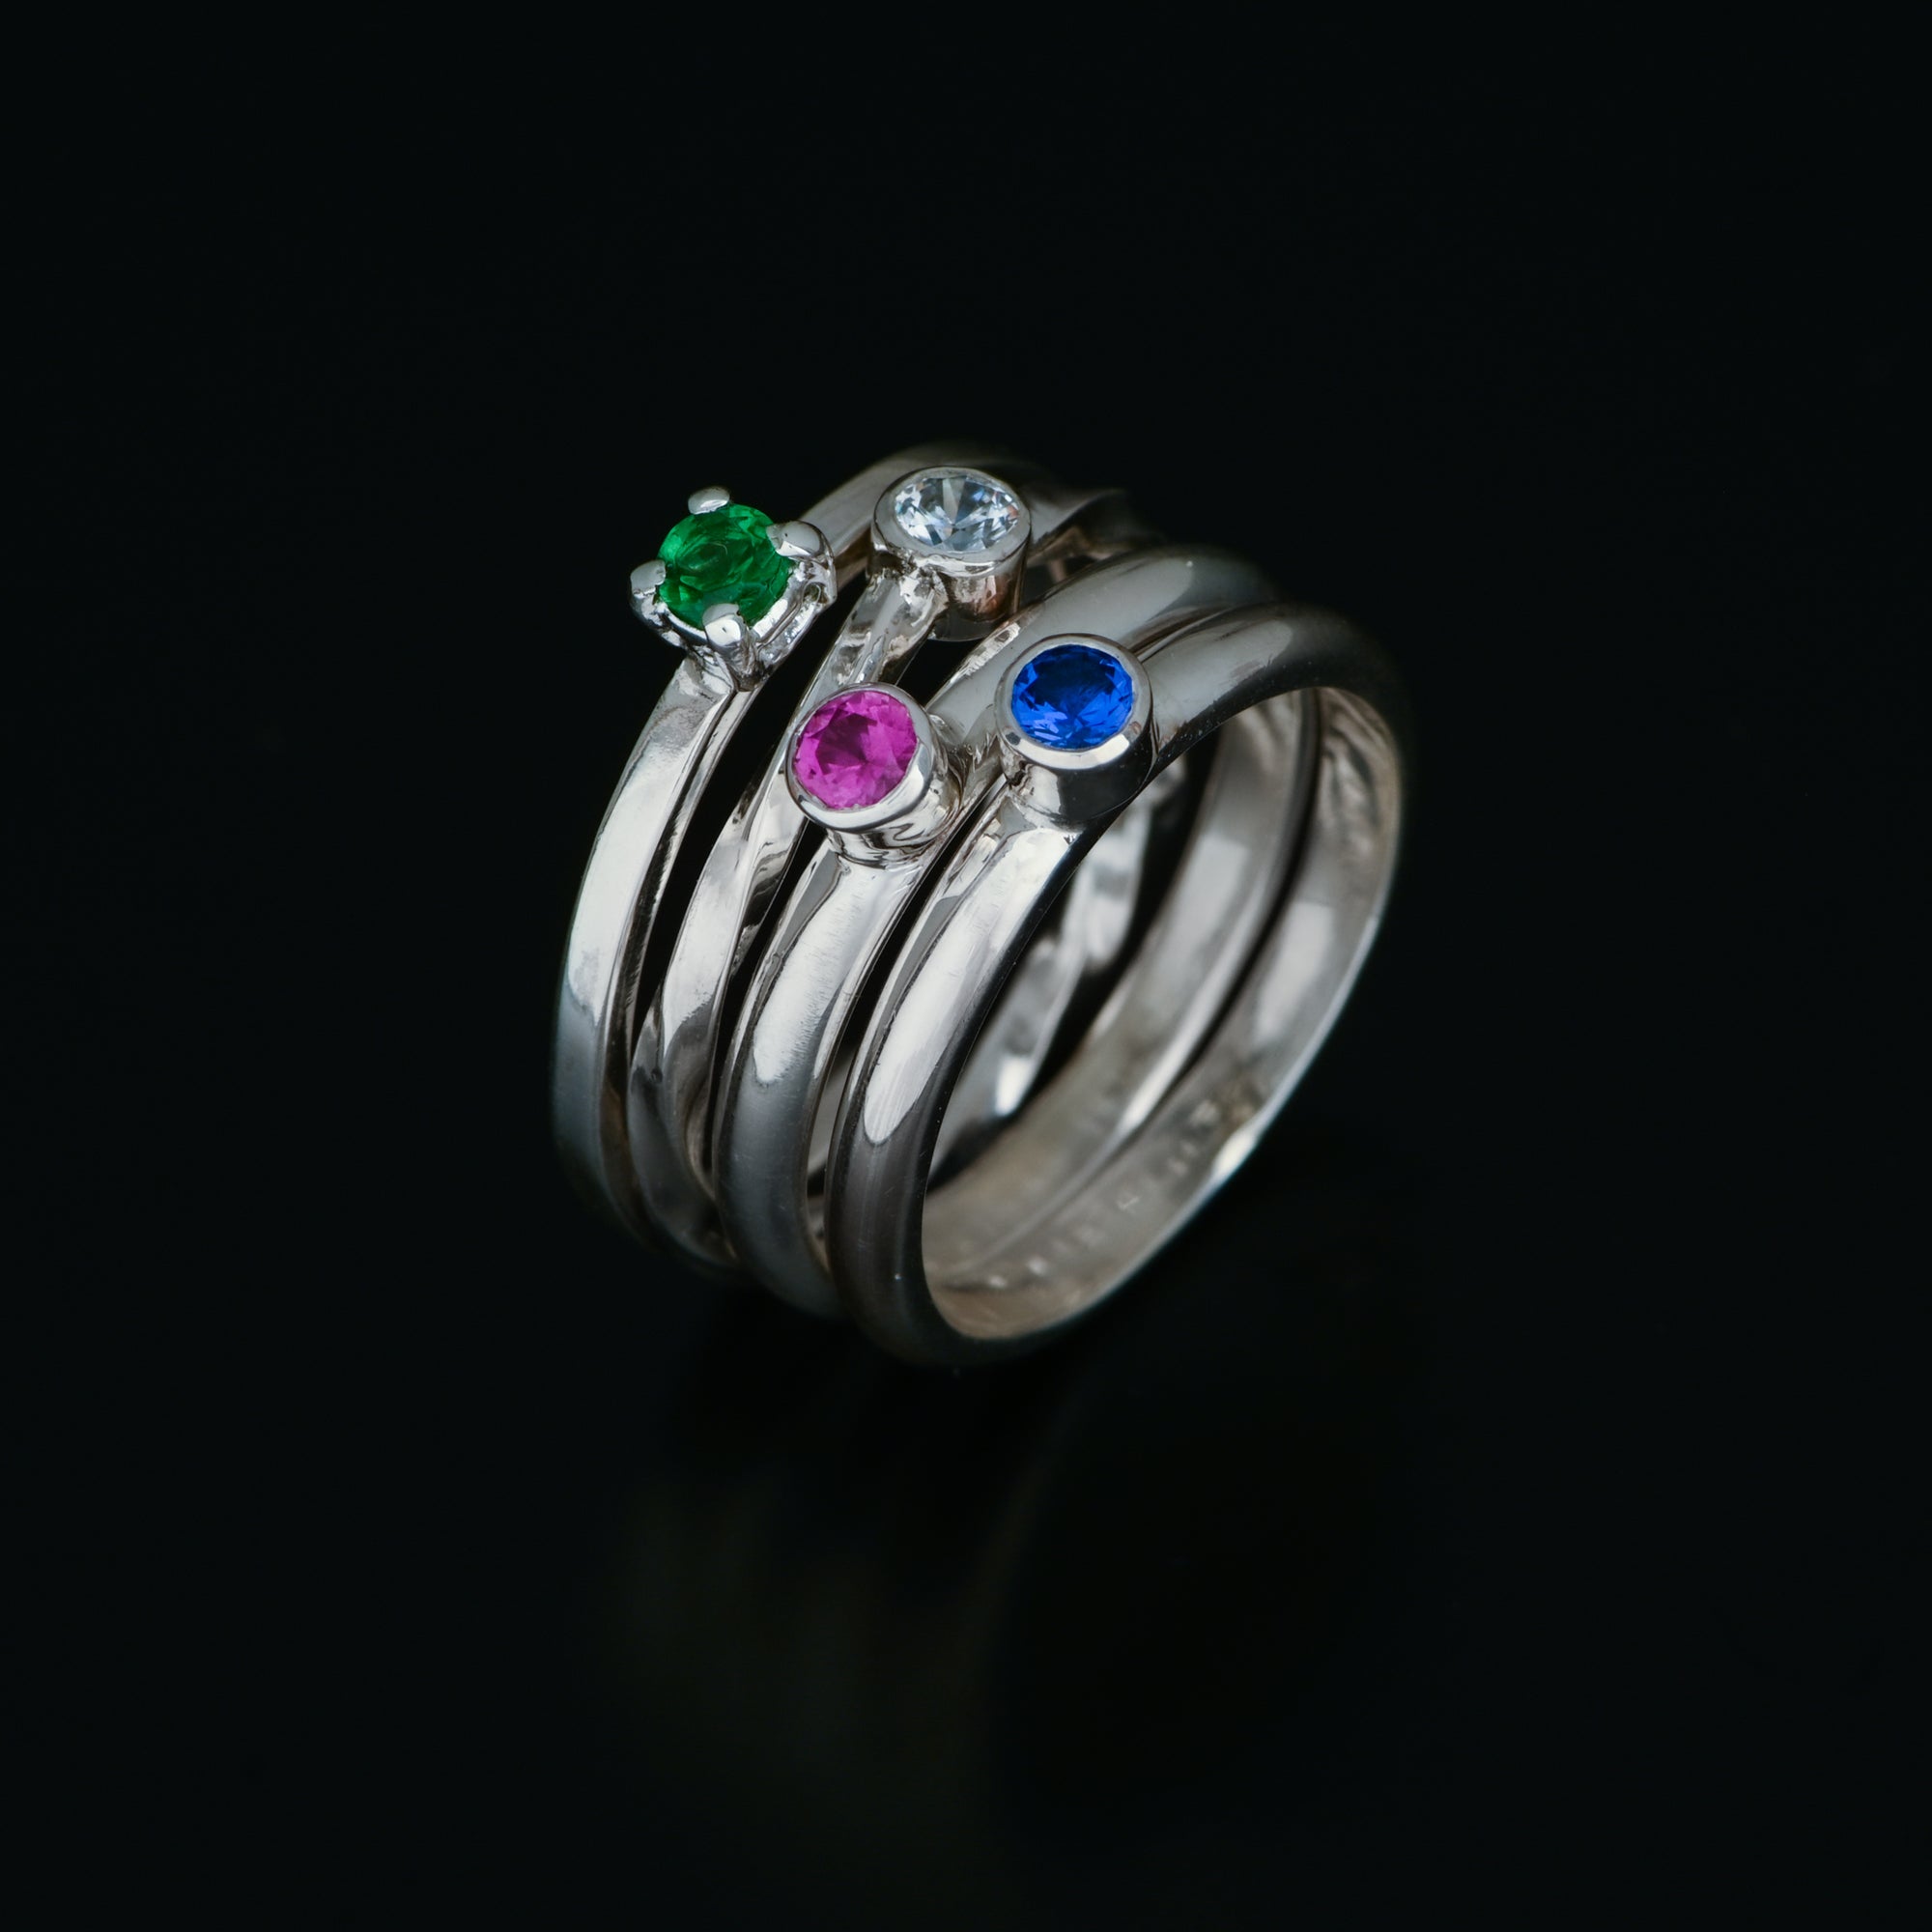 Solitaires and Stacks with Stones - March 24